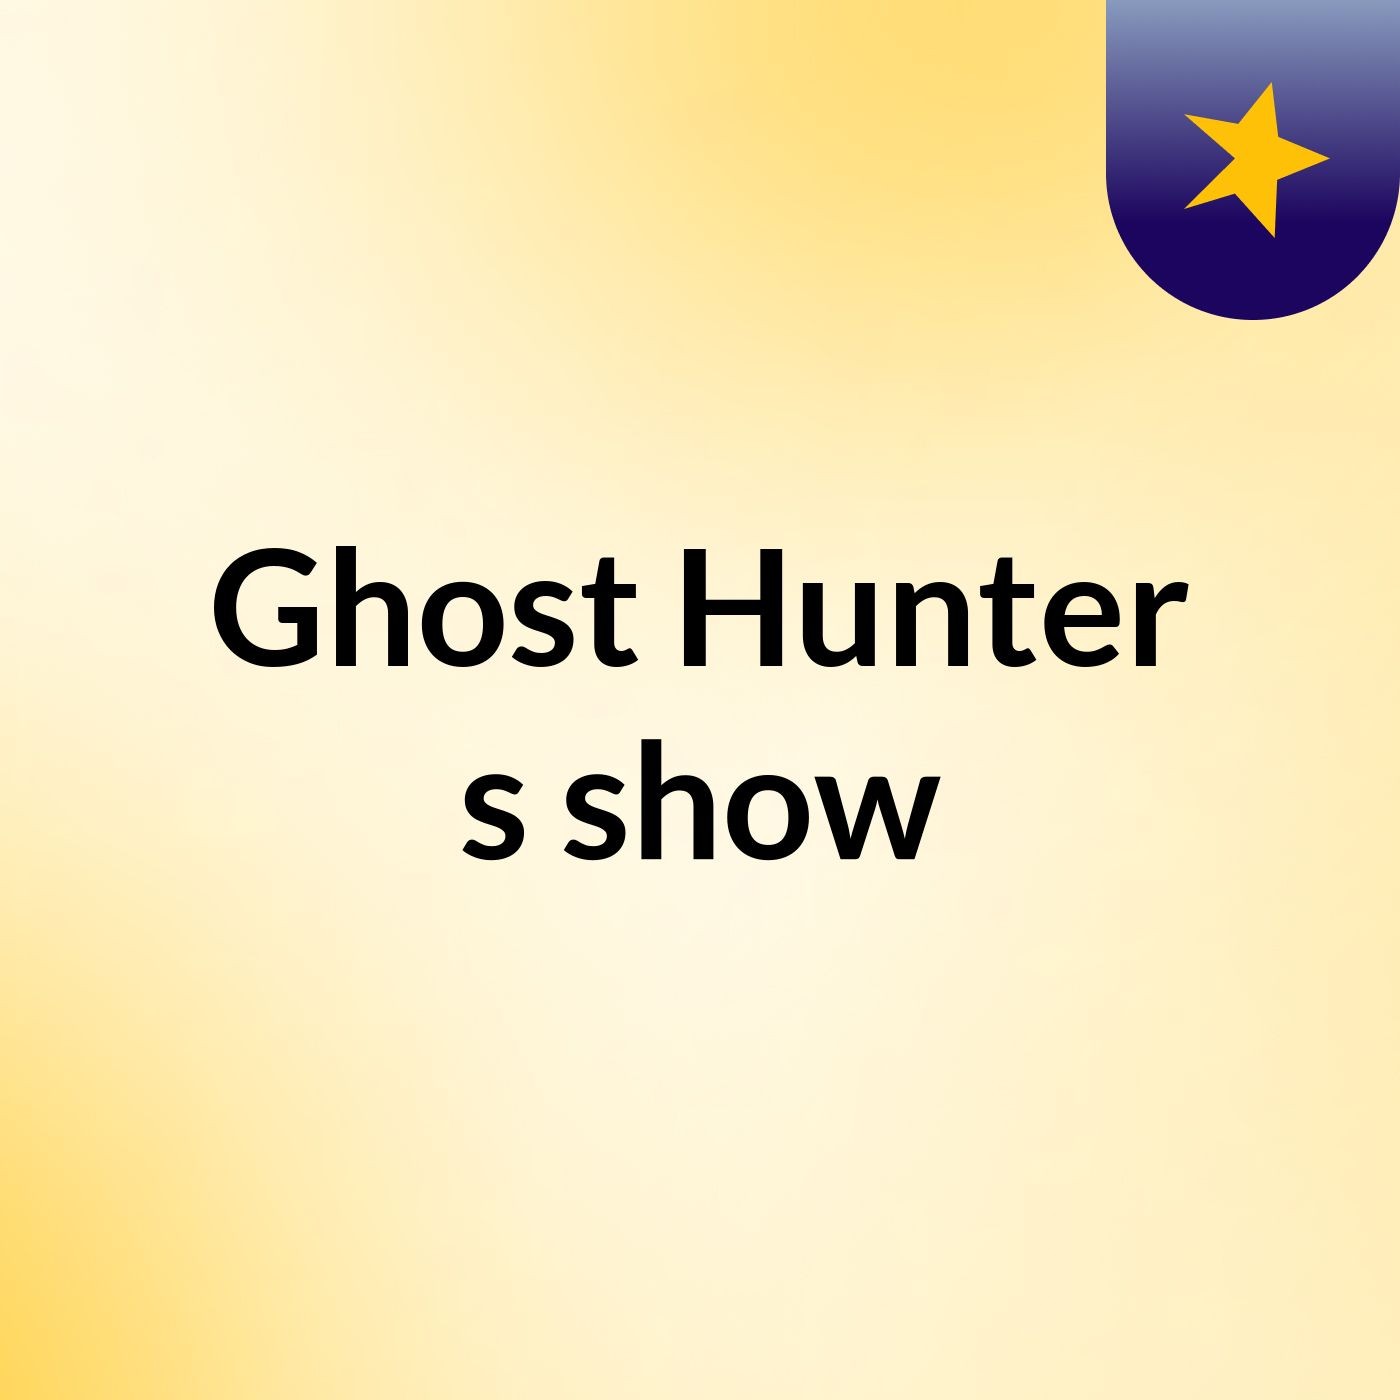 Ghost Hunter's show